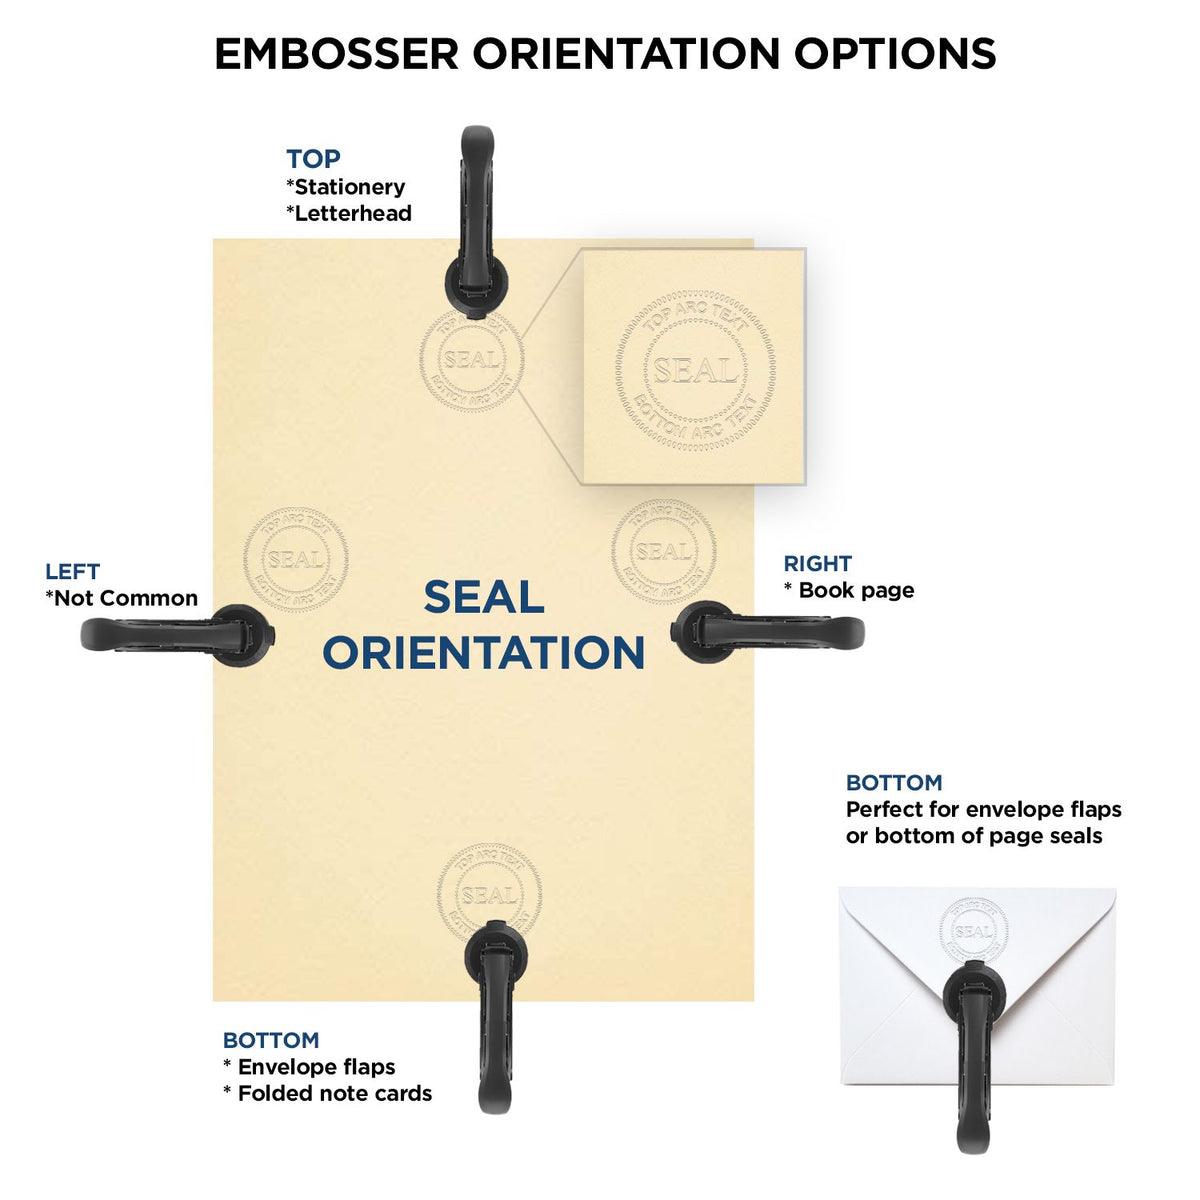 An infographic for the Handheld North Dakota Professional Engineer Embosser showing embosser orientation, this is showing examples of a top, bottom, right and left insert.